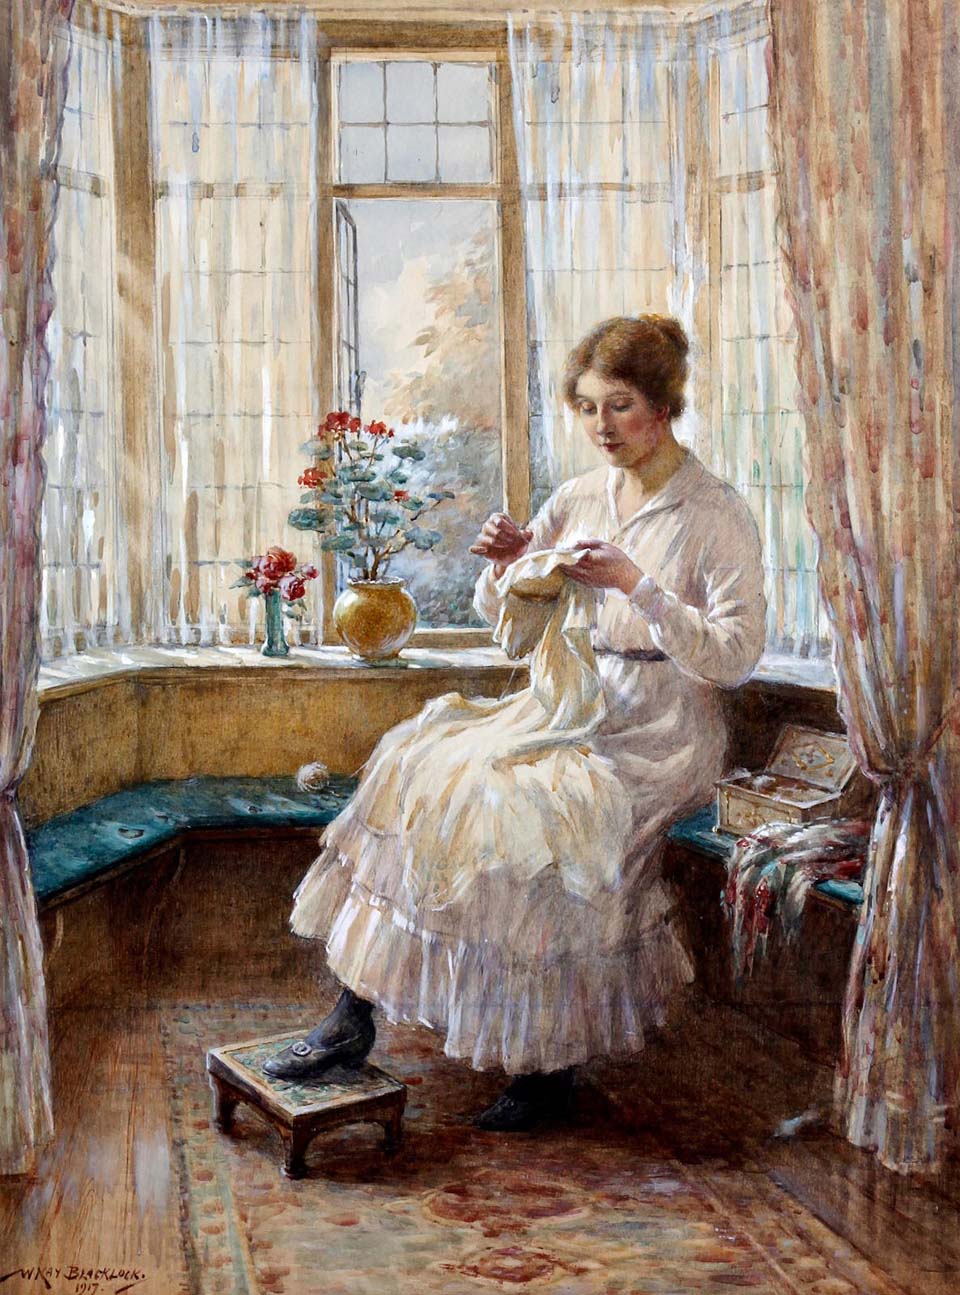 Lady sewing seated by a window